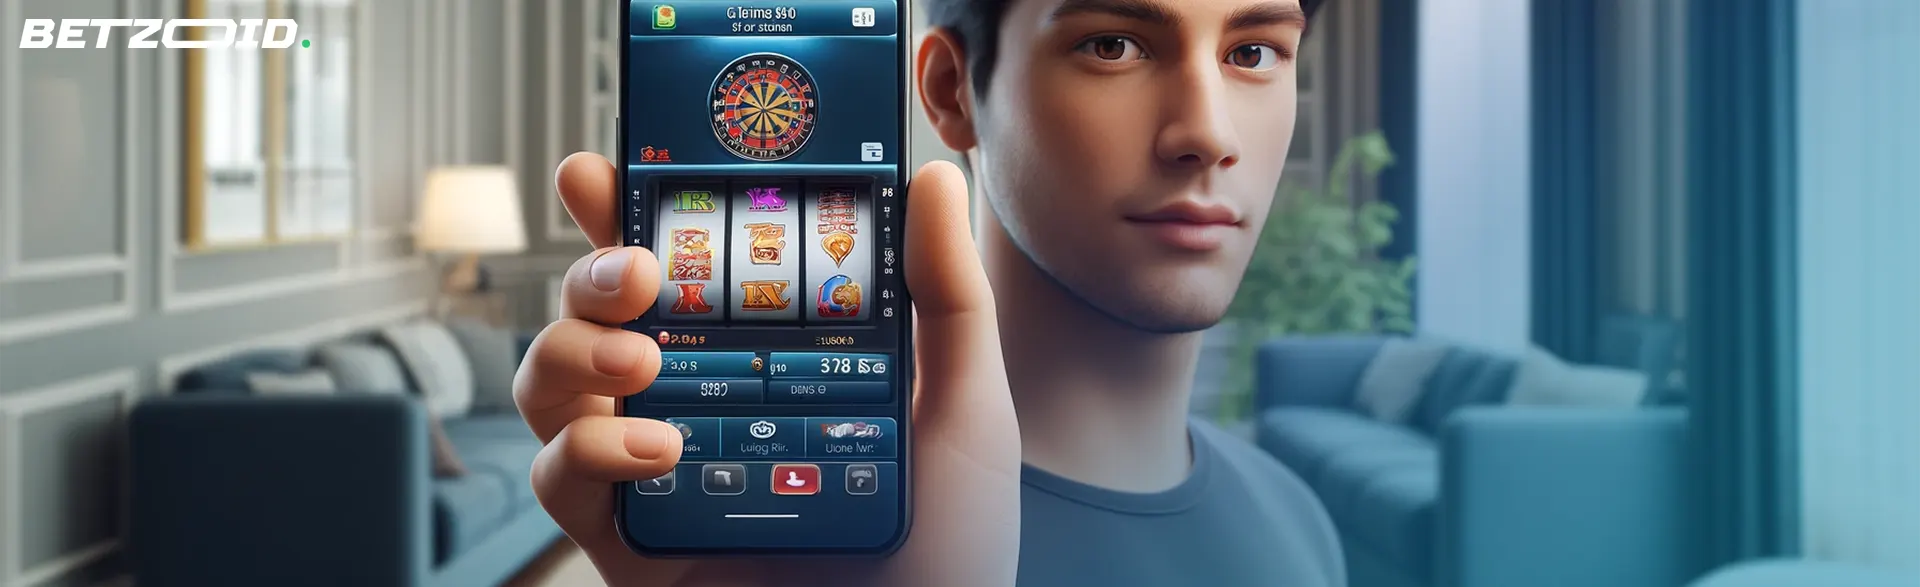 Man holding smartphone with casino slot game showing $300 free chip no deposit casinos.